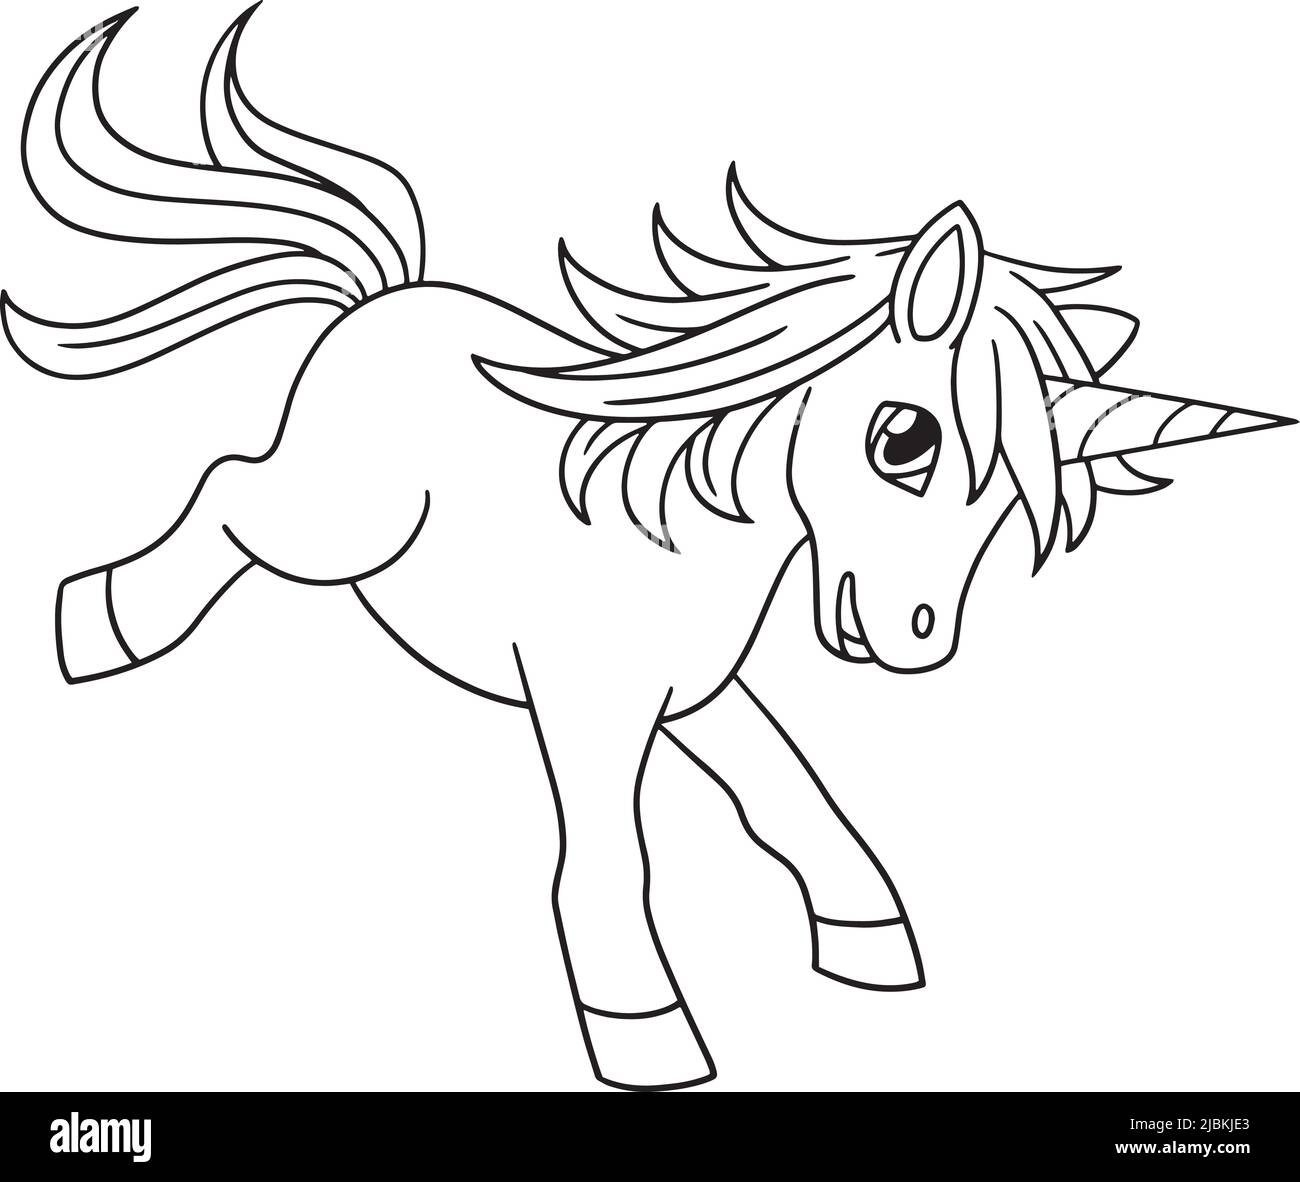 Falling Unicorn Isolated Coloring Page for Kids Stock Vector